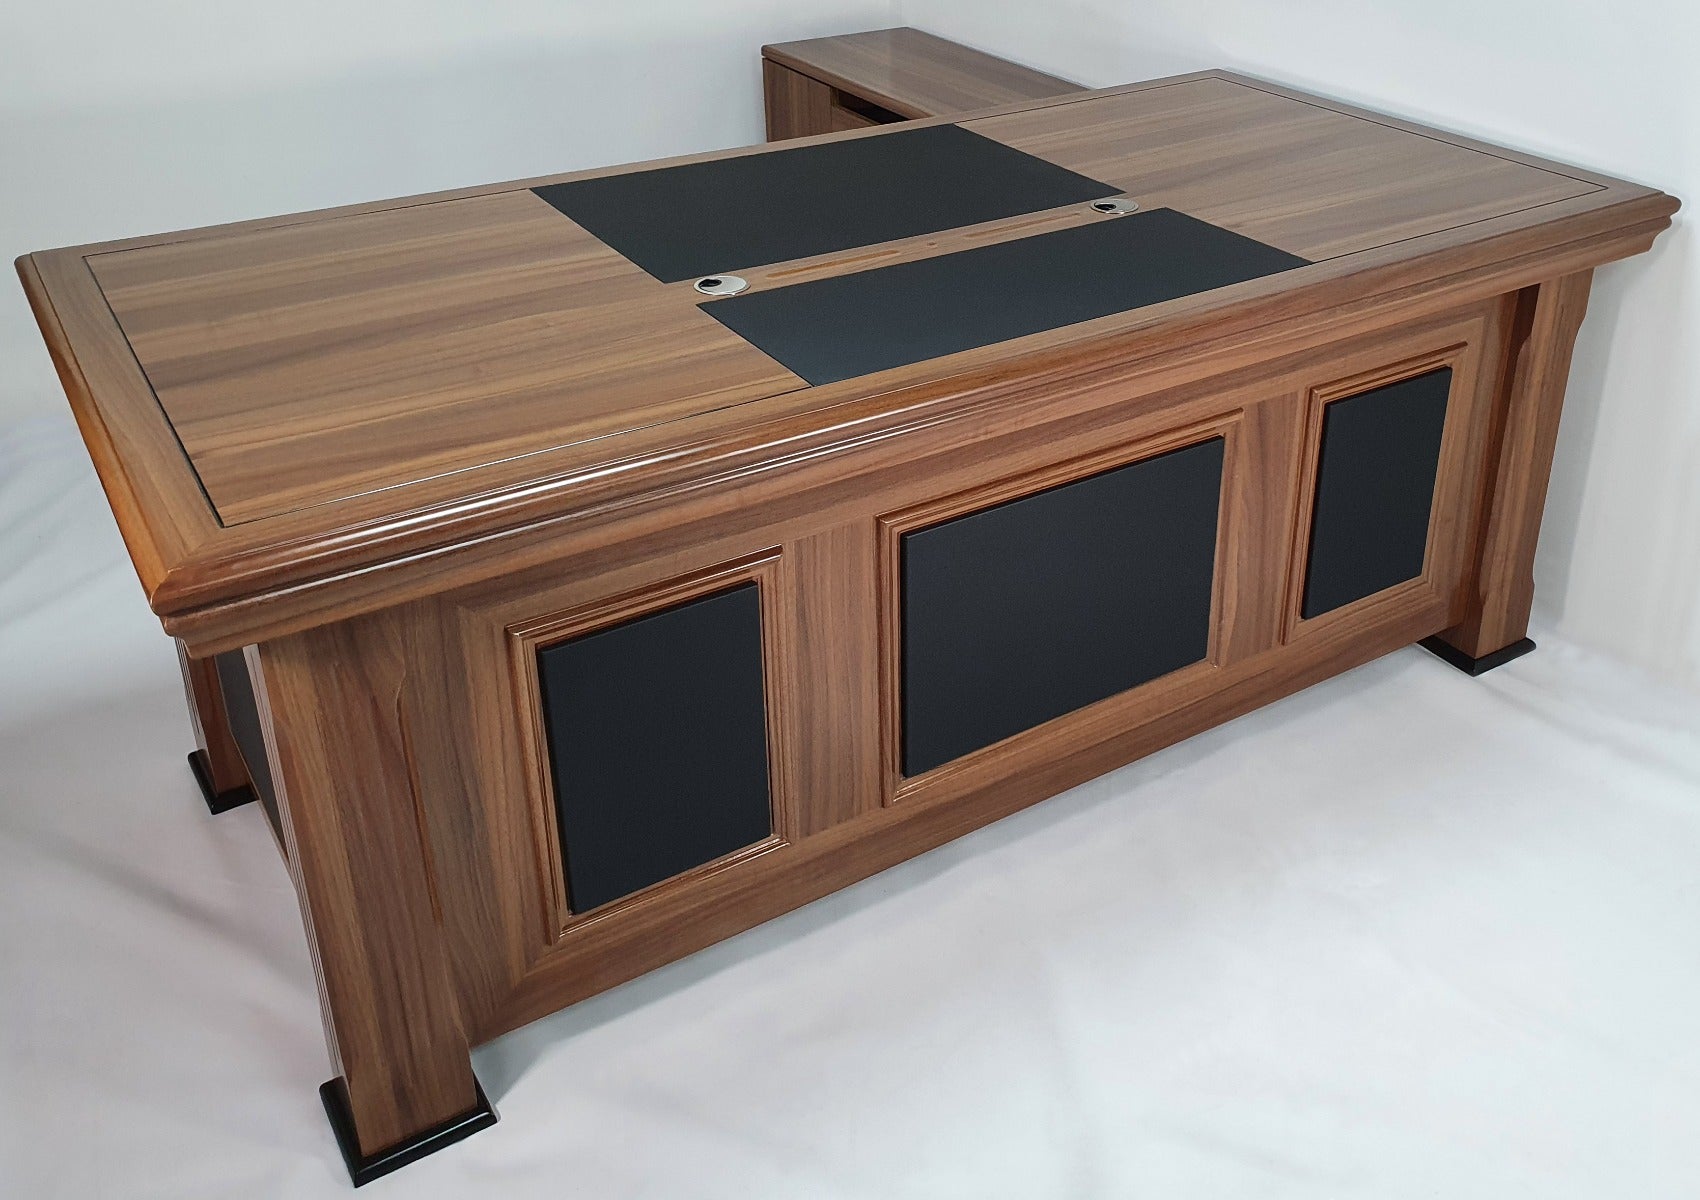 Light Oak Executive Desk With Leather Detailing - With Pedestal and Return - 2233 UK